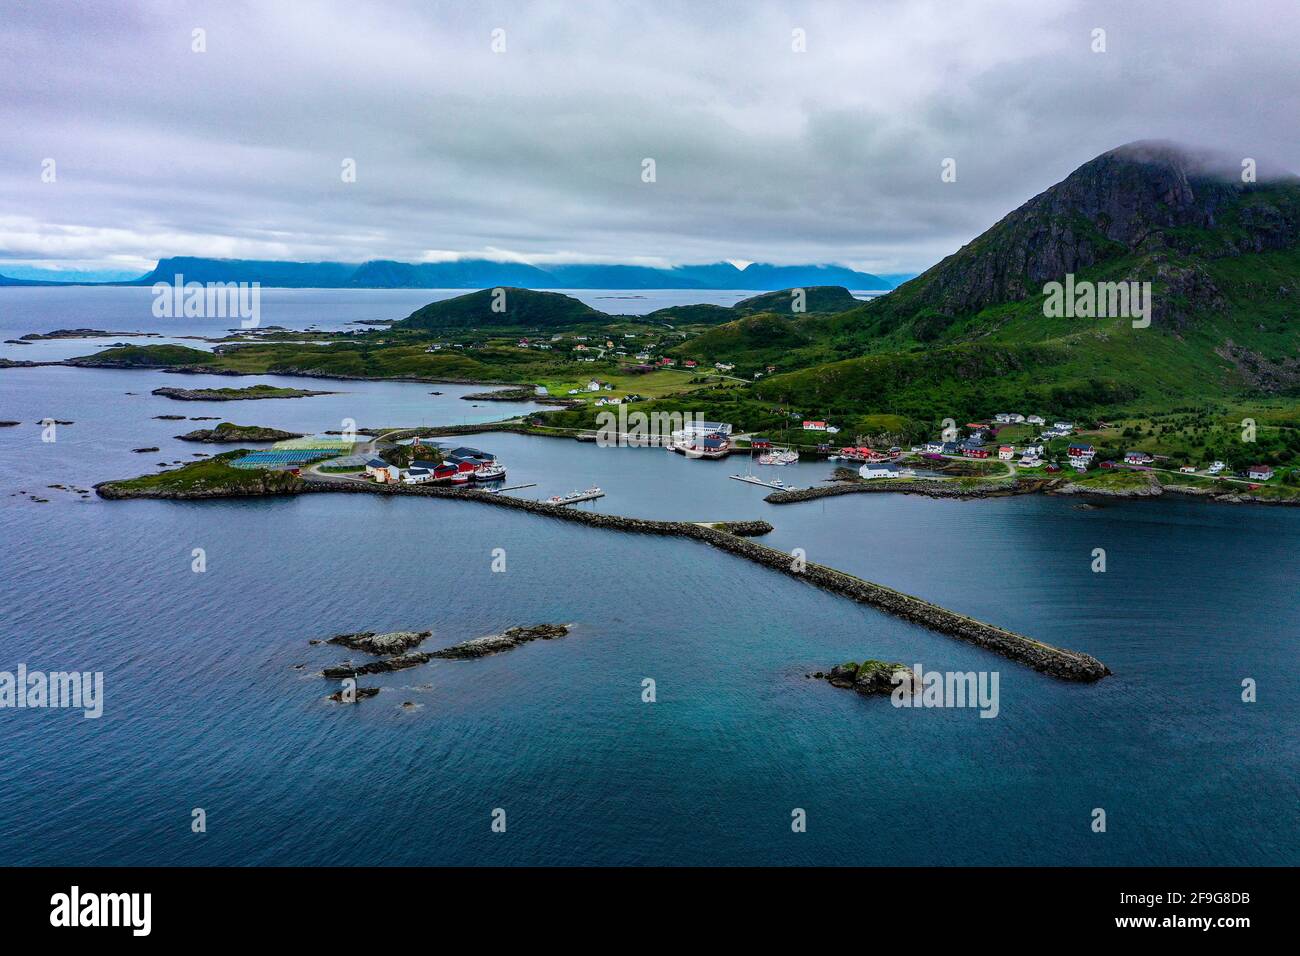 Aerial view of the Sto town at the northern tip of the island of Langoya, in Vesteralen archipelago, cloudy day, in North Norway - drone shot Stock Photo